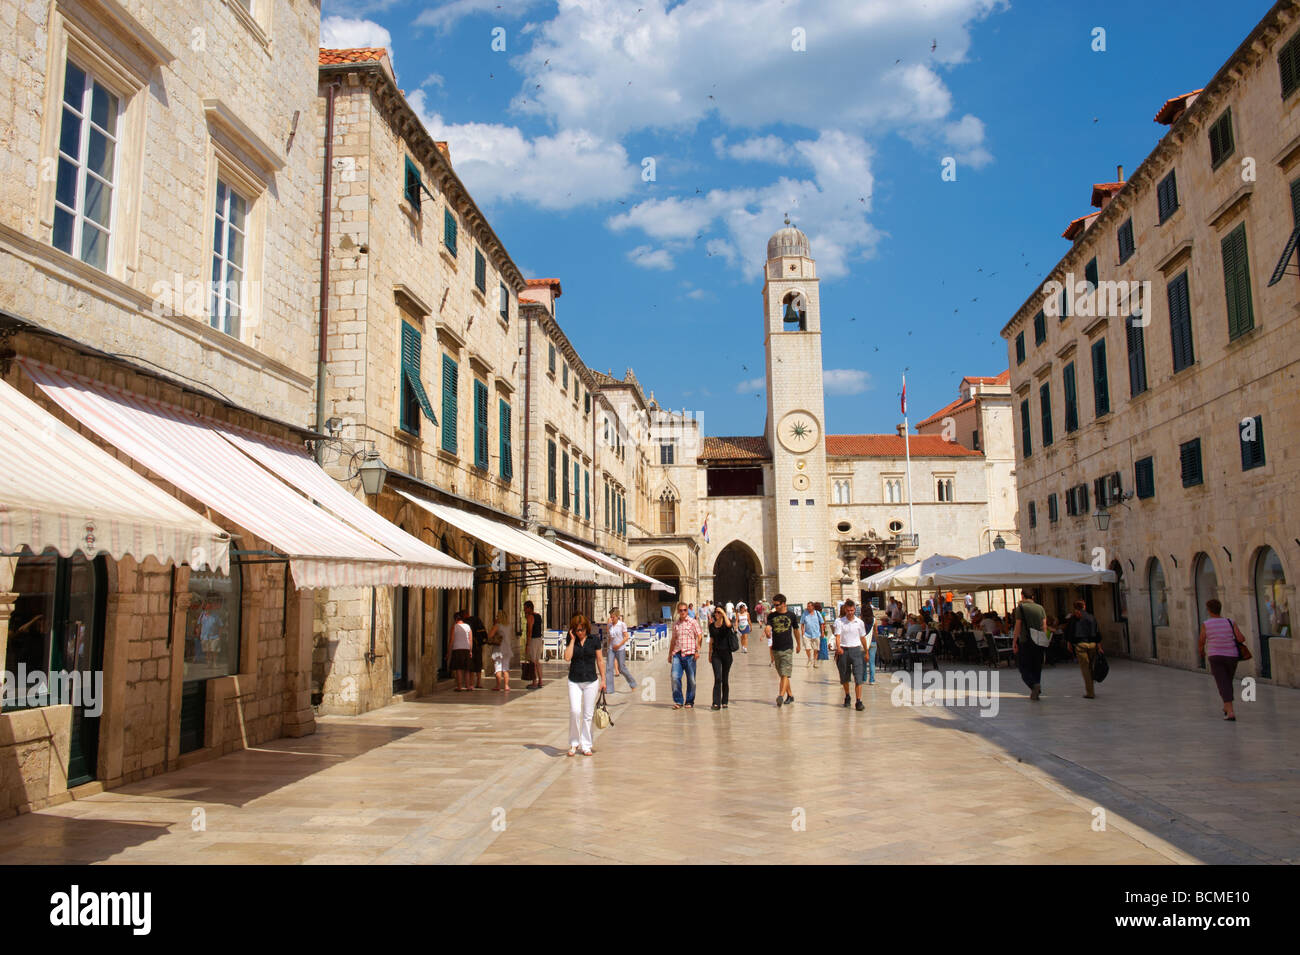 Placa (Stradum) - Main street in Dubrovnik looking towards the the Bell Tower Stock Photo